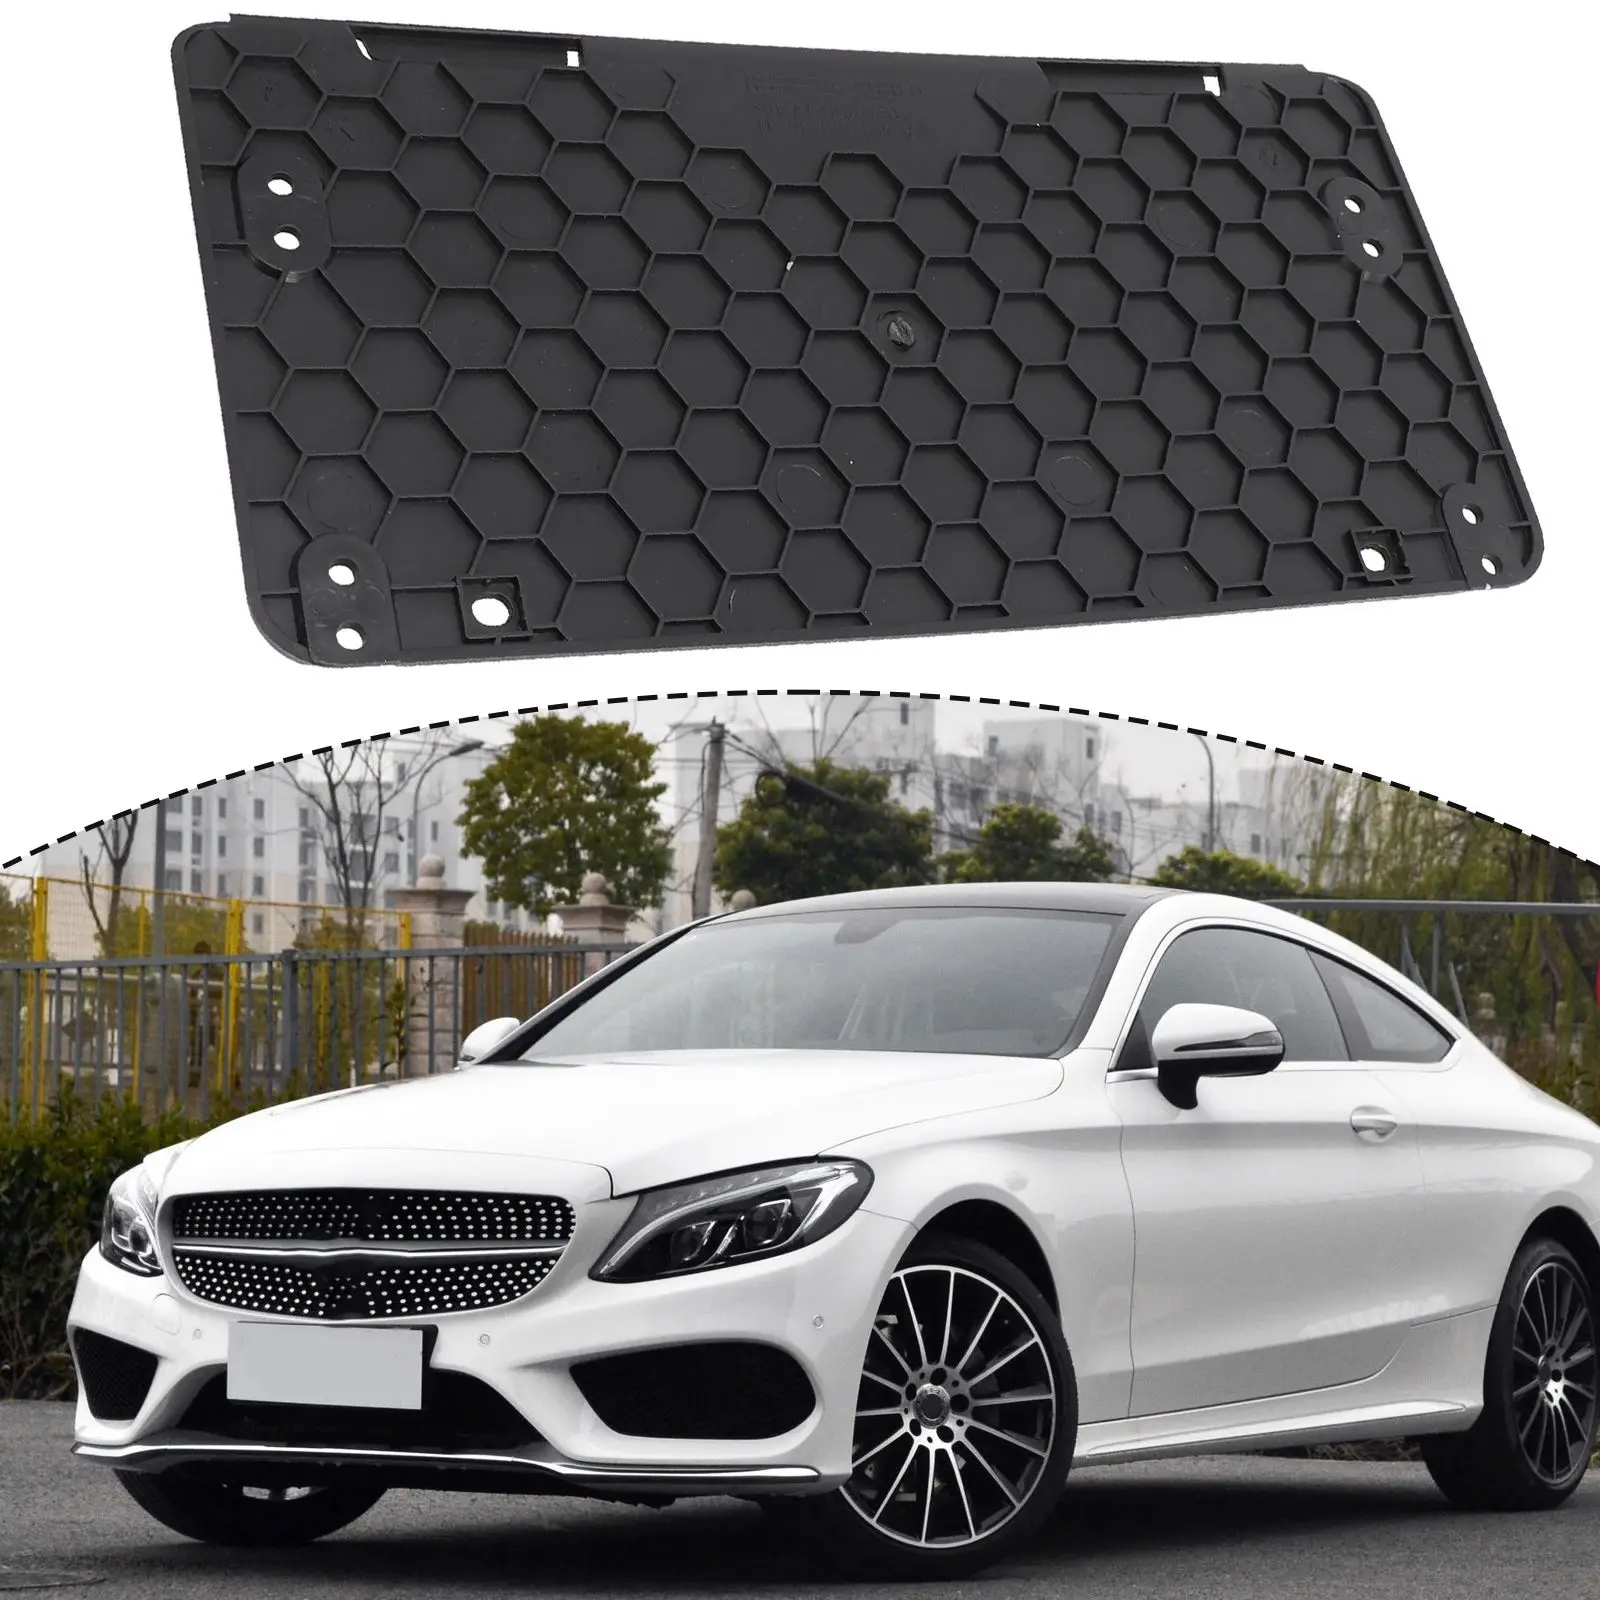 

Rear License Plate Tag Holder Mounting Bracket For Mercedes A1698170211 License Plate Base Plate Plug-and Play Frames